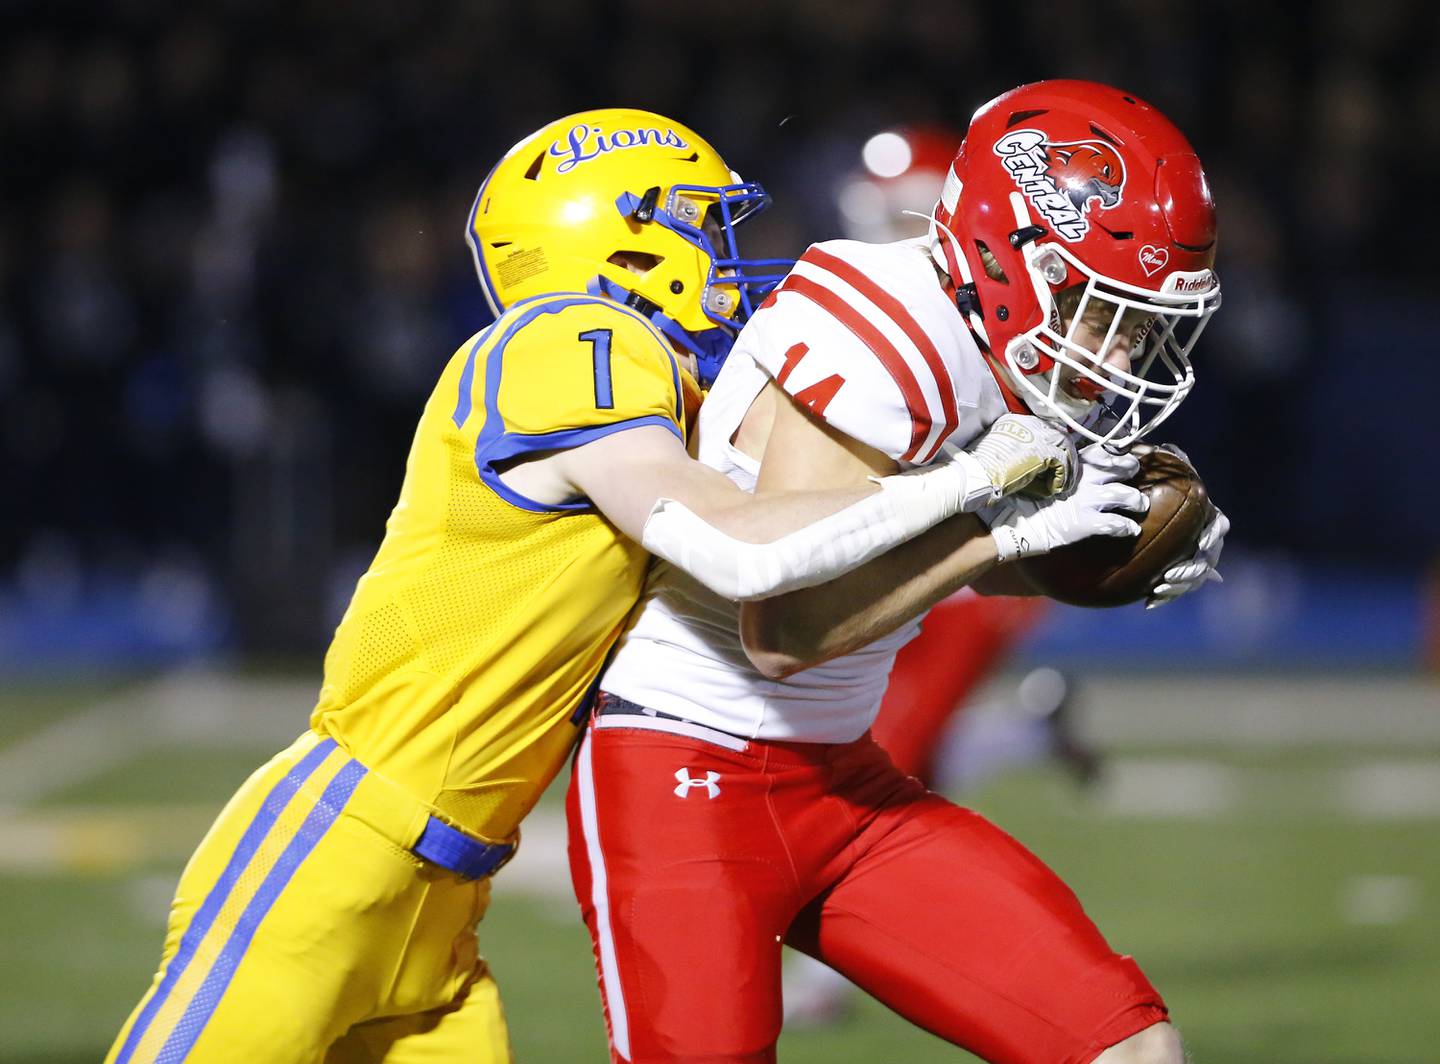 Lyons' Danny Montsesano (1) wraps up Naperville Central's Logan Devick (14) during a first round Class 8A varsity football playoff game between Lyons Township and Naperville Central on Friday, Oct. 28, 2022 in Western Springs, IL.